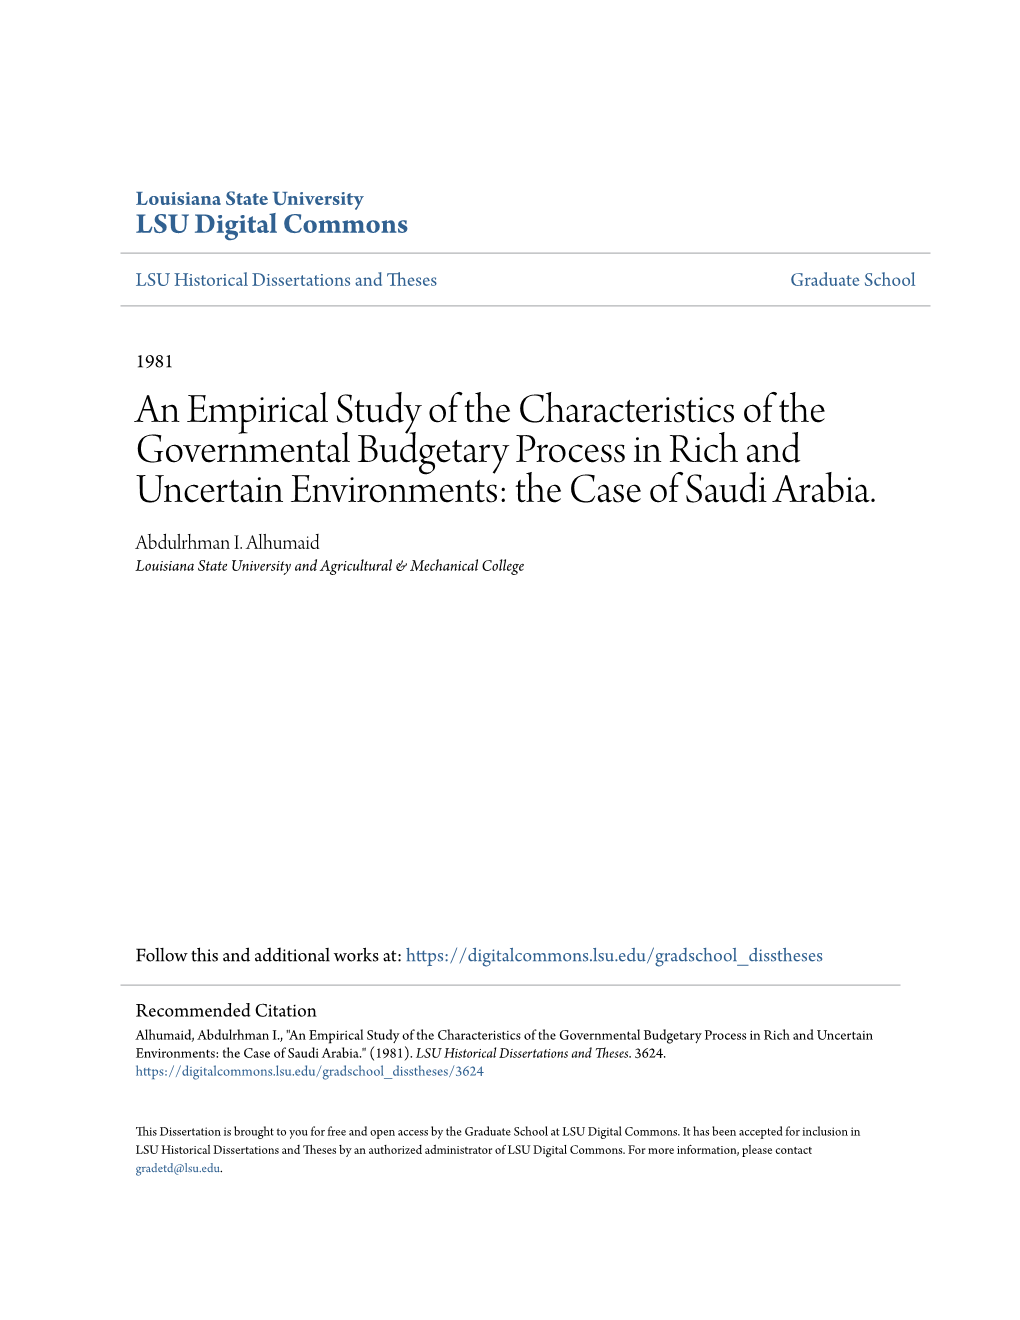 An Empirical Study of the Characteristics of the Governmental Budgetary Process in Rich and Uncertain Environments: the Case of Saudi Arabia